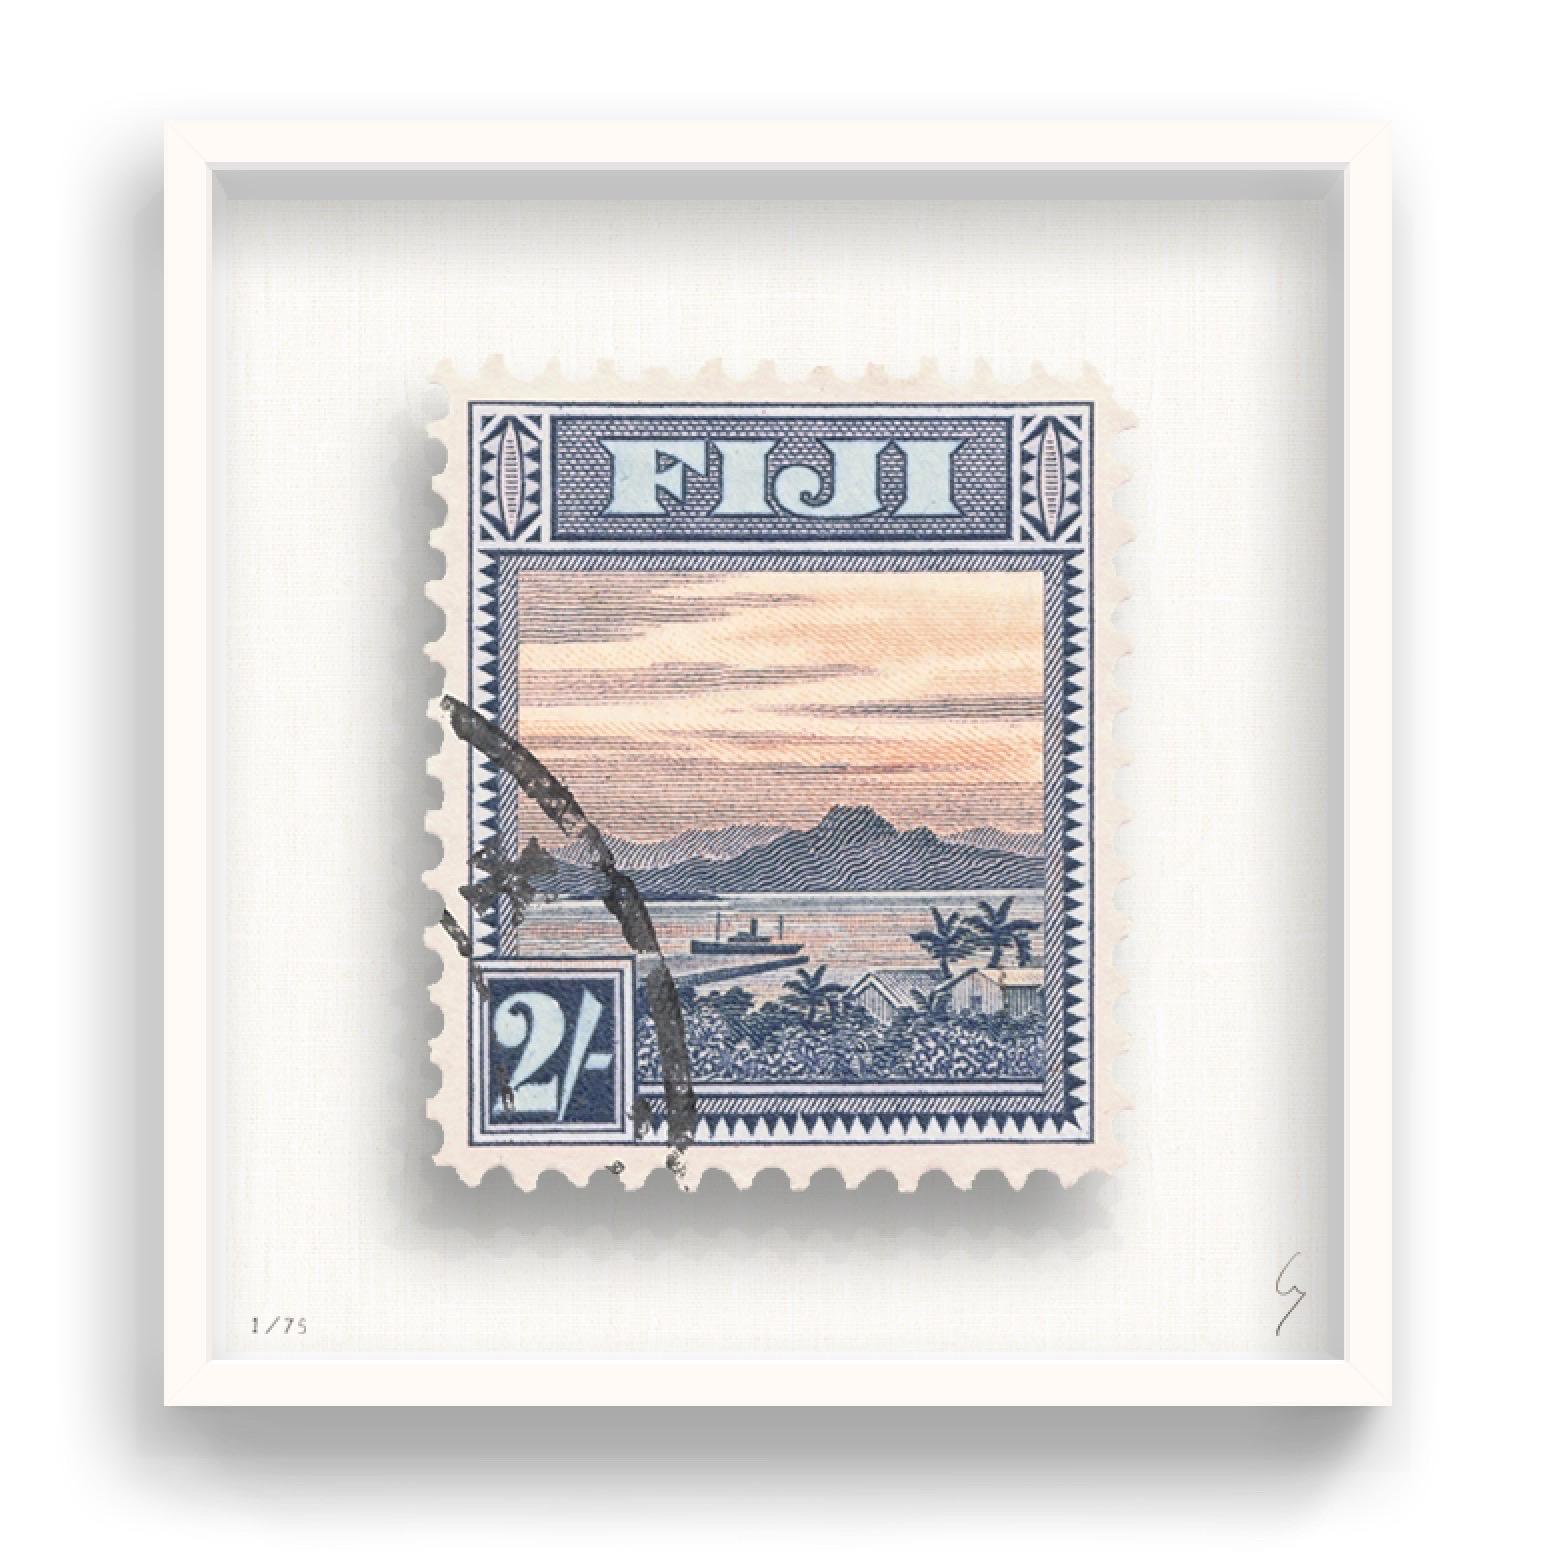 Guy Gee, Fiji (medium)

Hand-engraved print on 350gsm on G.F Smith card
53 x 56cm (20 4/5 x 22 2/5 in)
Frame included 
Edition of 75 

Each artwork by Guy had been digitally reimagined from an original postage stamp. Cut out and finished by hand,